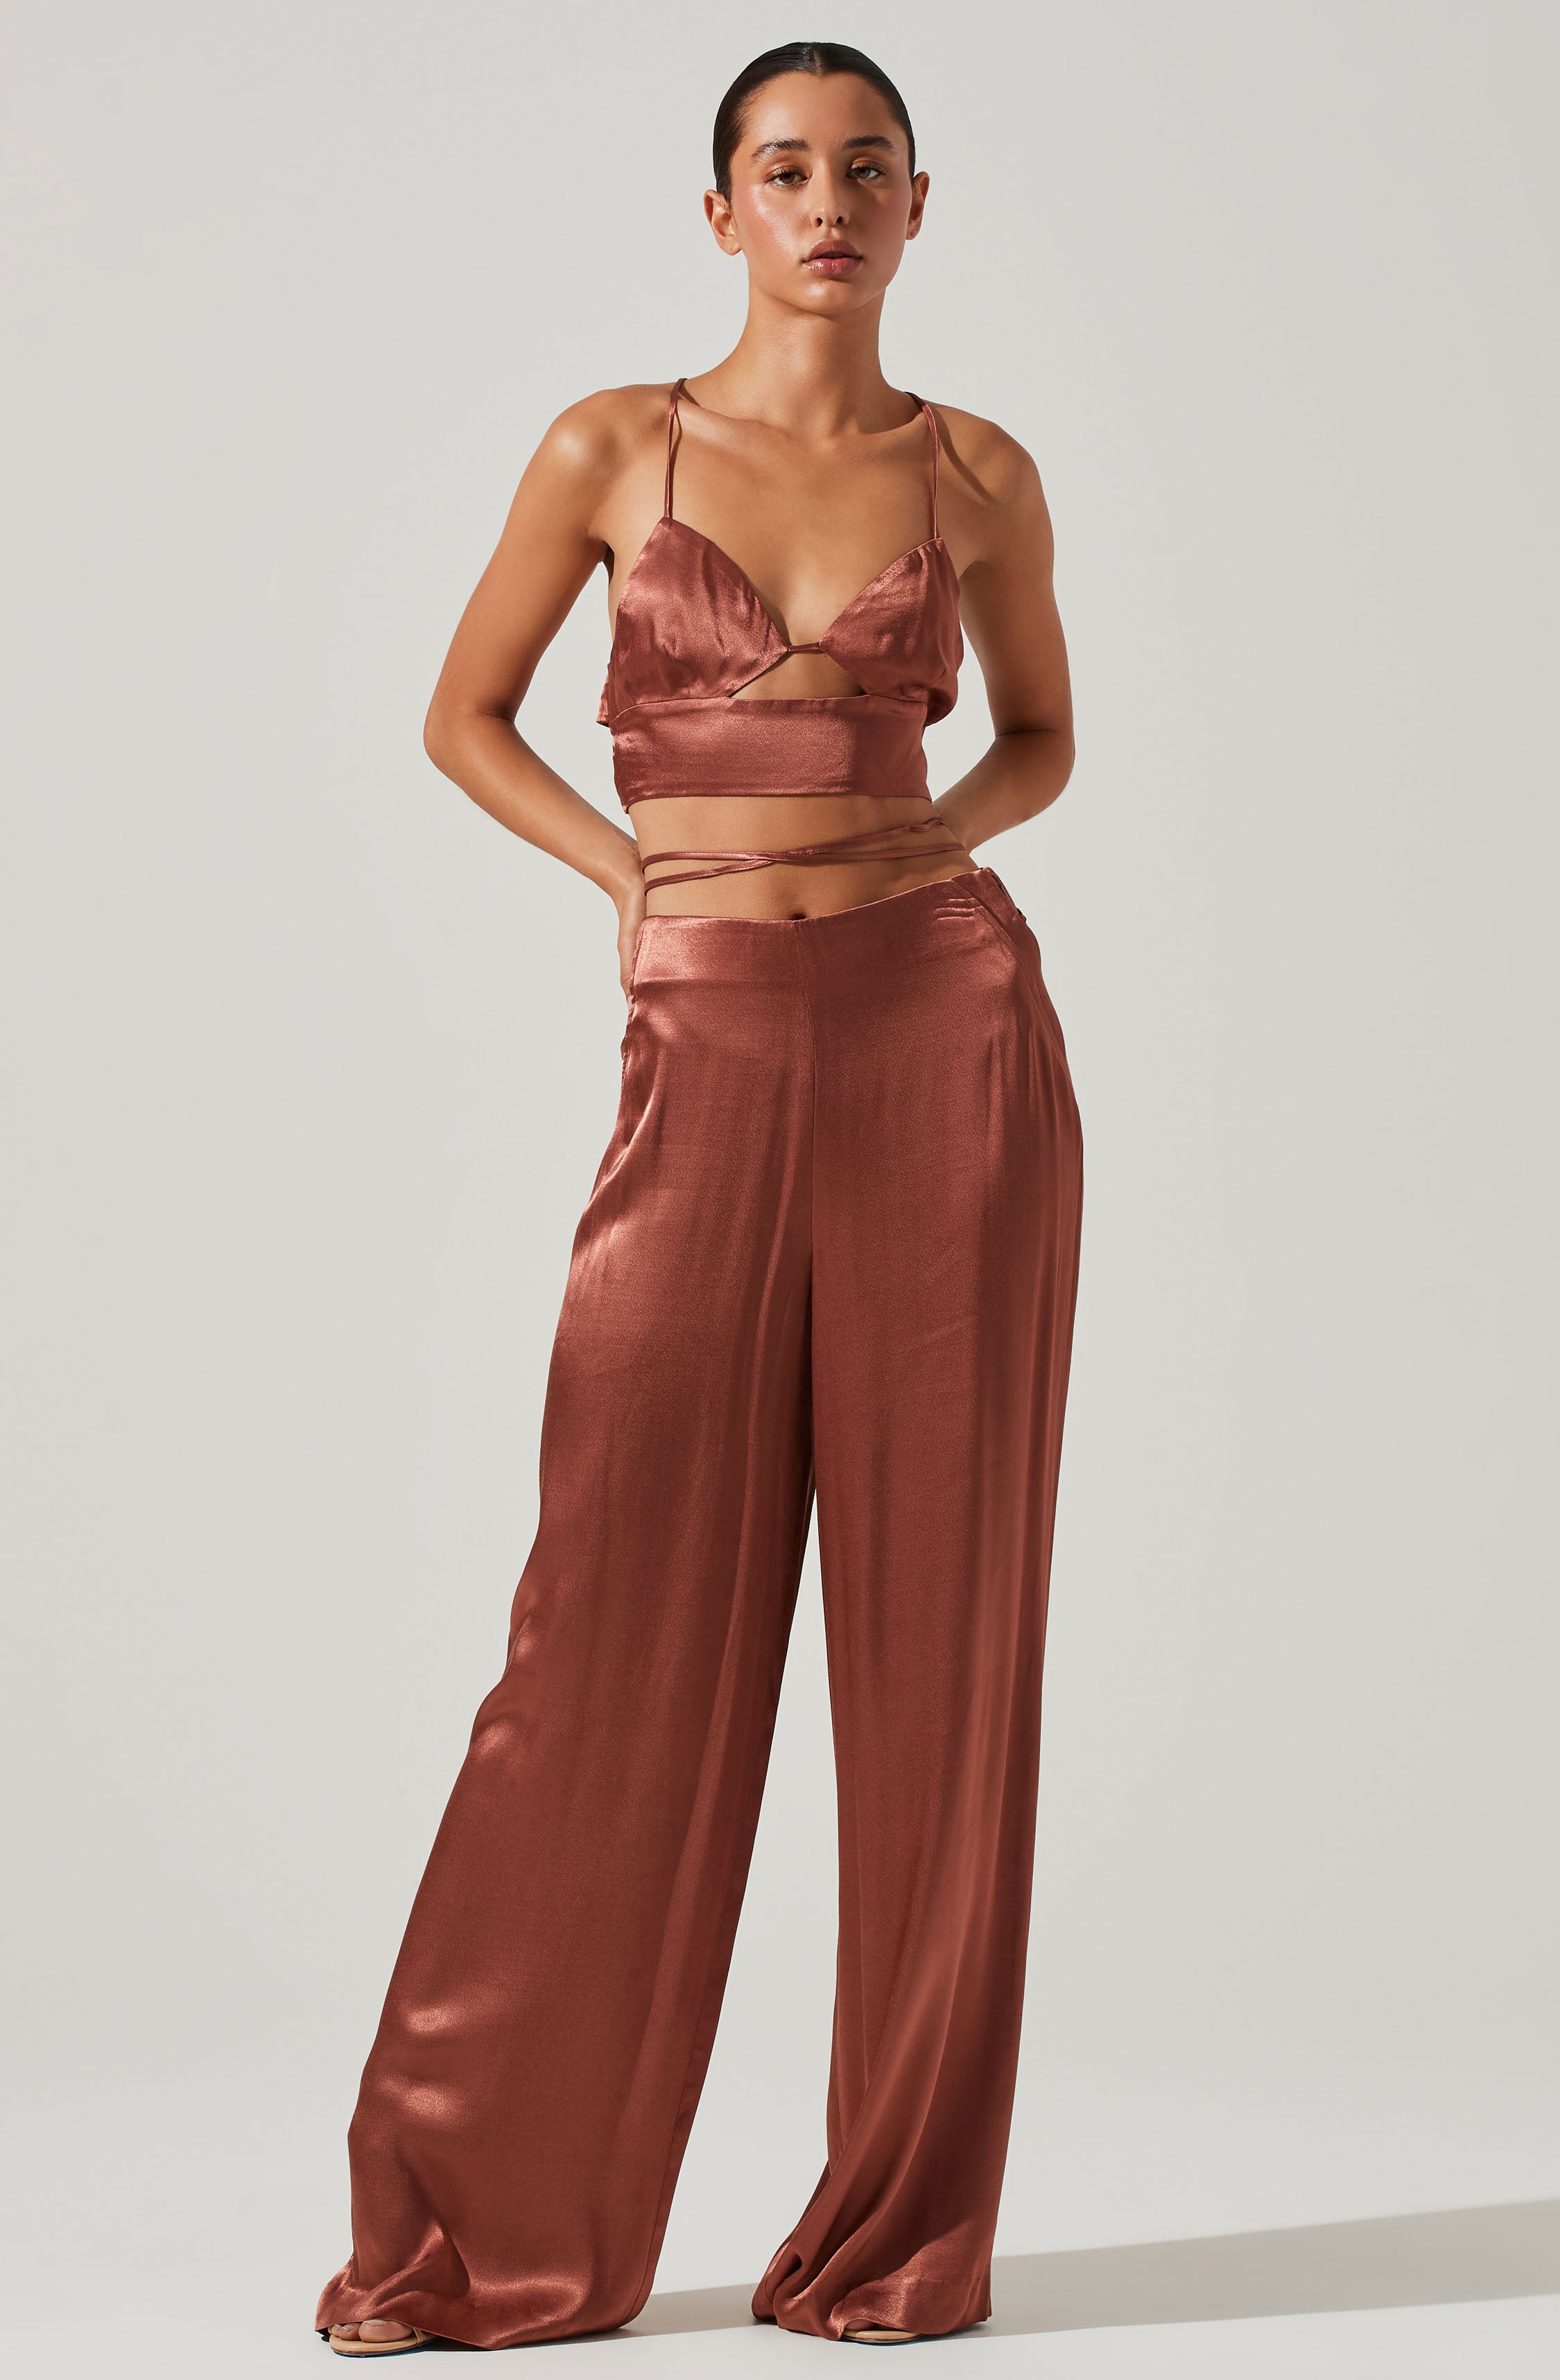 Astr The Label Cruise Control Pleated Wide Leg Pants-***FINAL SALE***